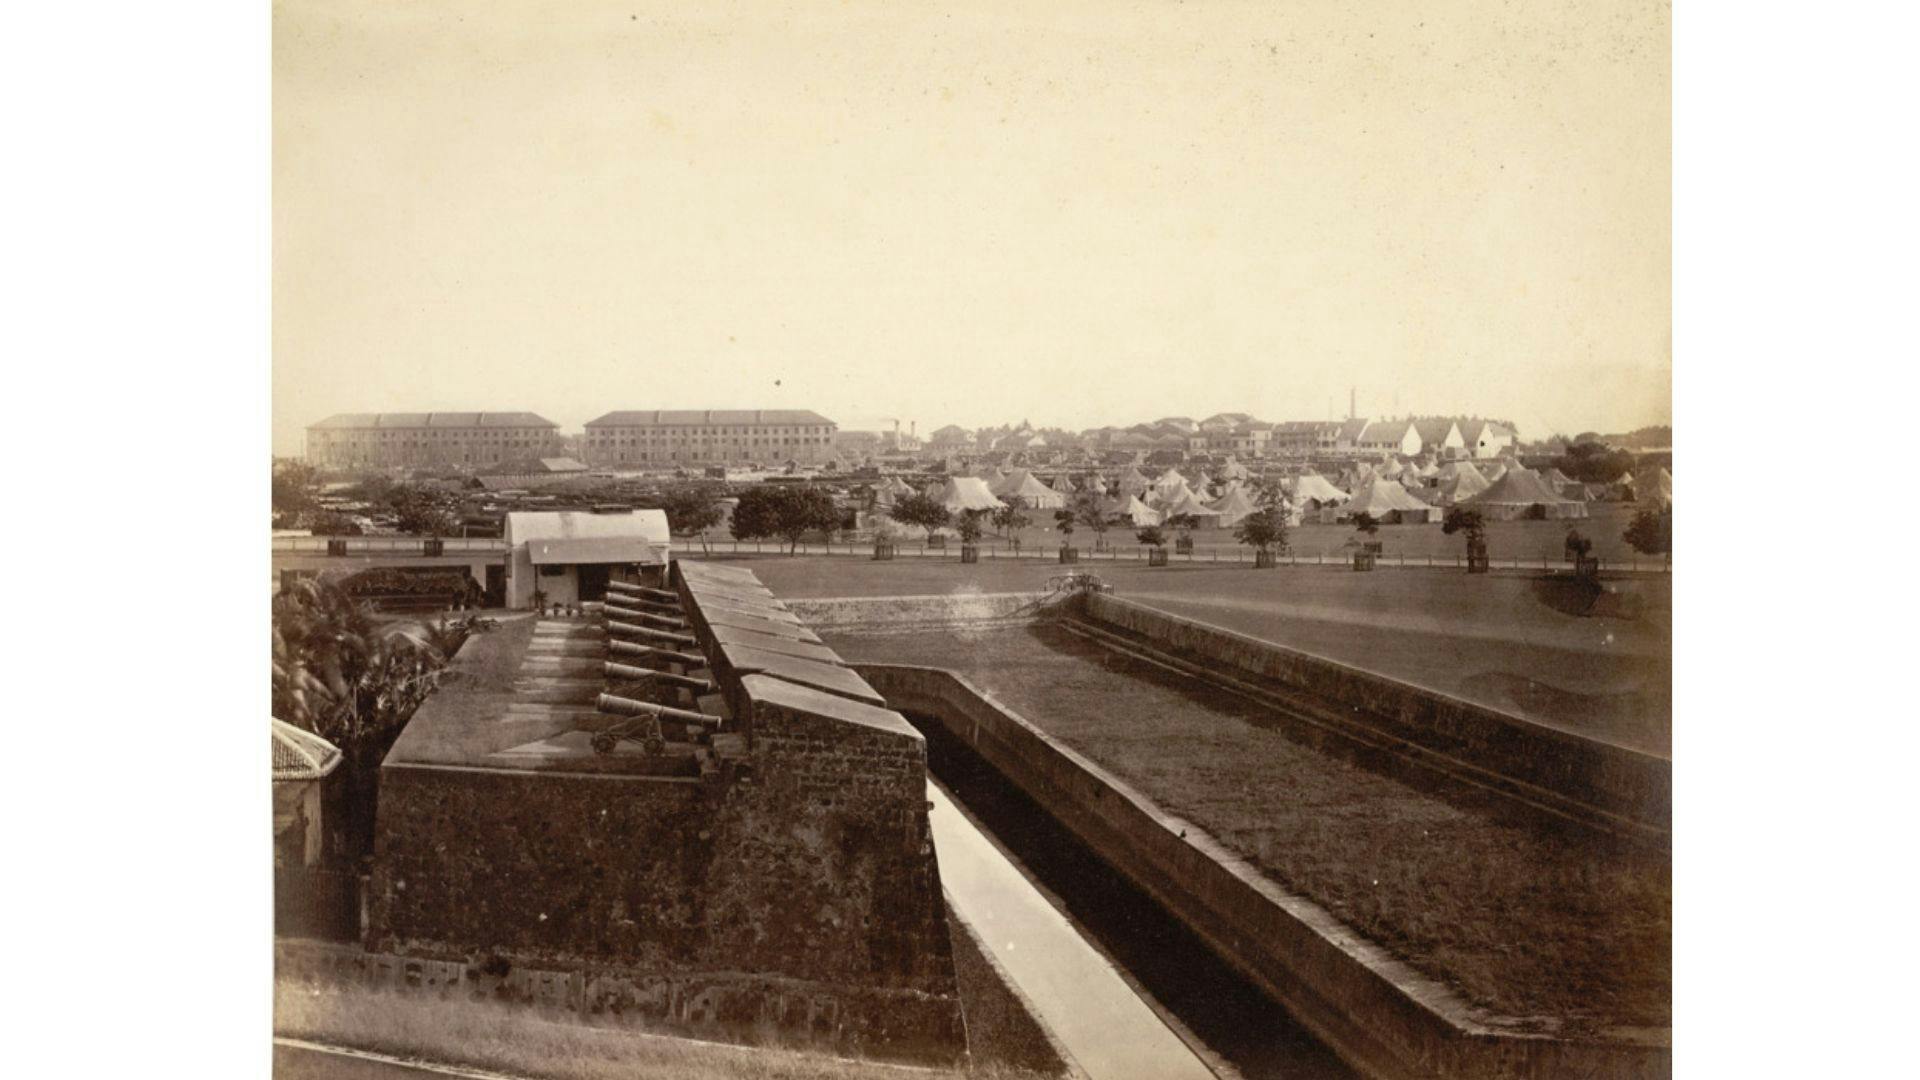 The Stranger's Lines, Esplanade, showing part of the old ramparts of the Fort, Bombay (1863)